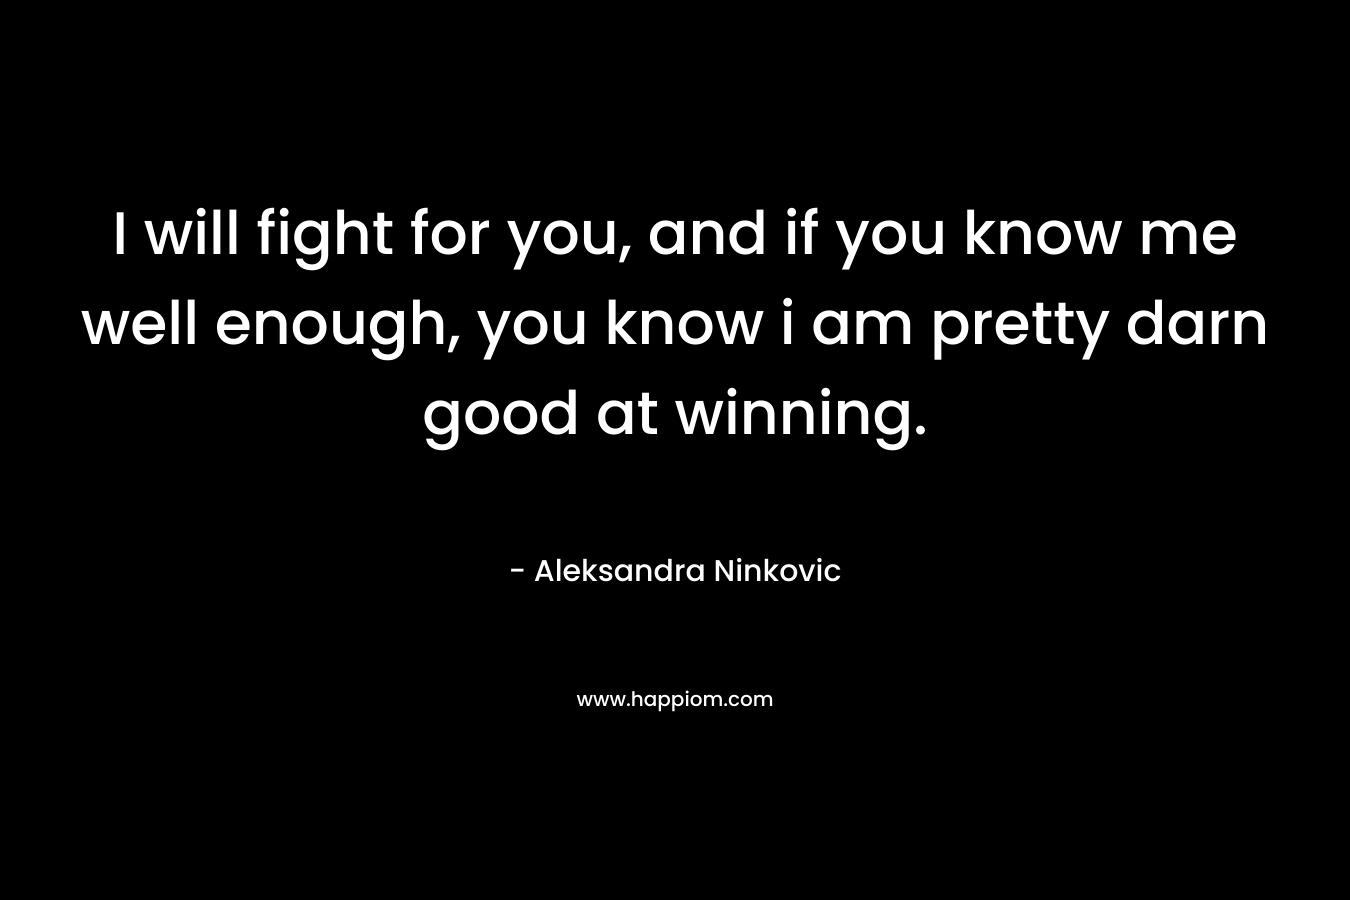 I will fight for you, and if you know me well enough, you know i am pretty darn good at winning. – Aleksandra Ninkovic